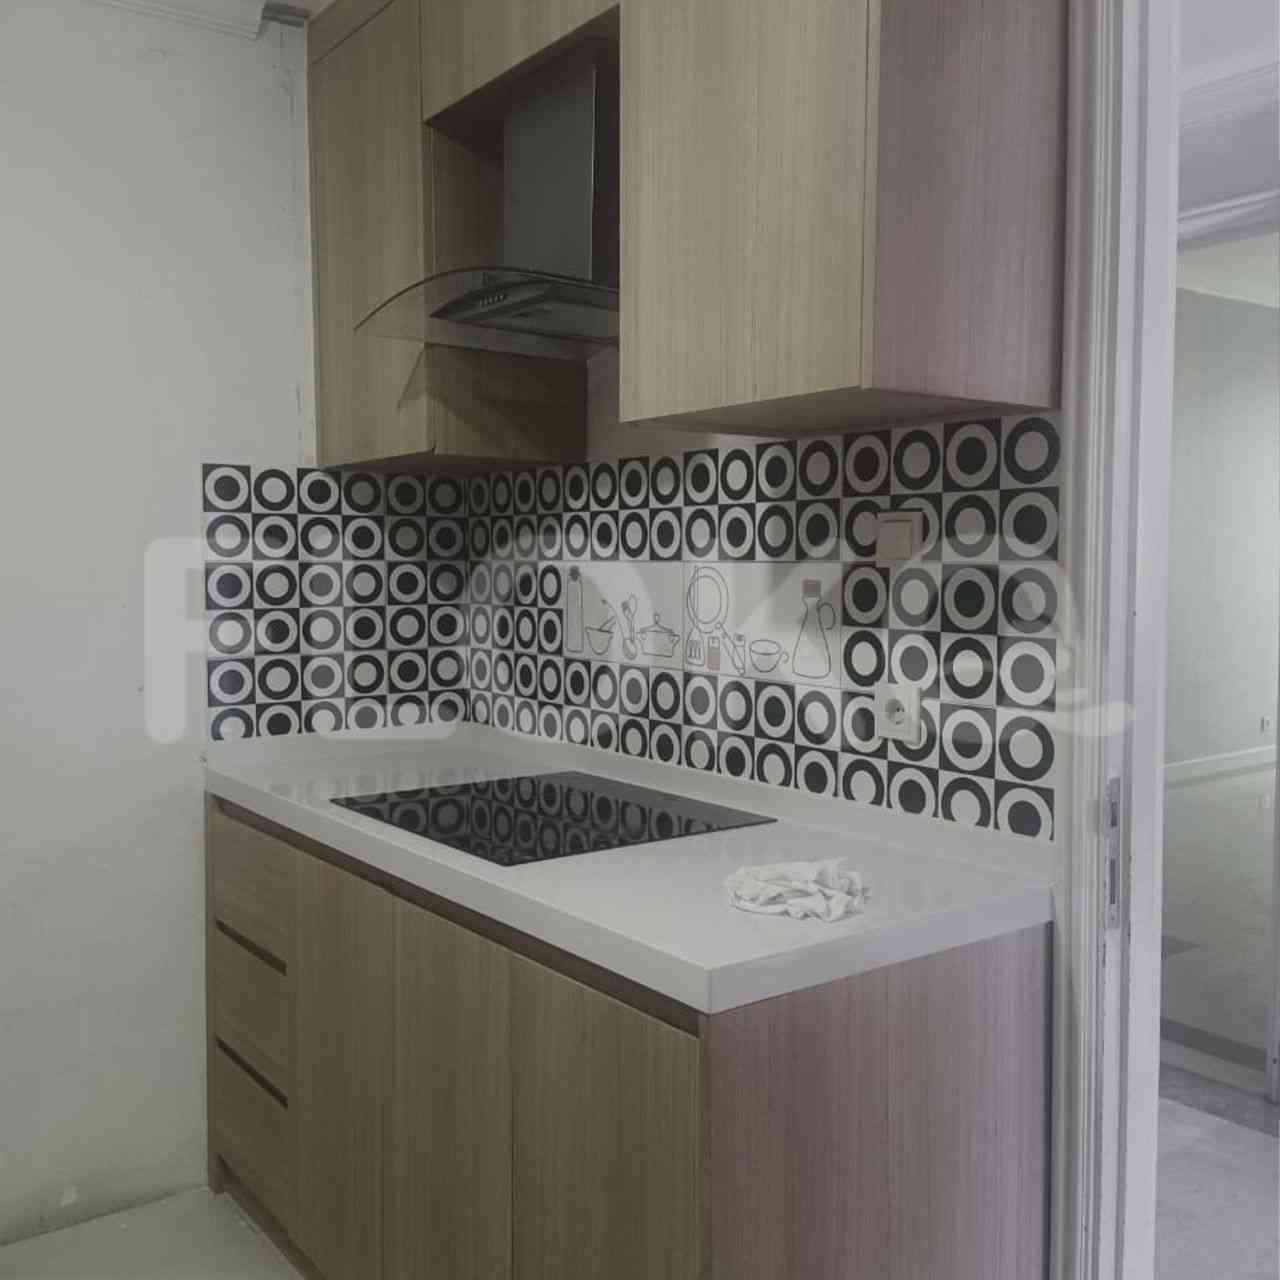 3 Bedroom on 15th Floor for Rent in Casablanca Apartment - ftebd9 5